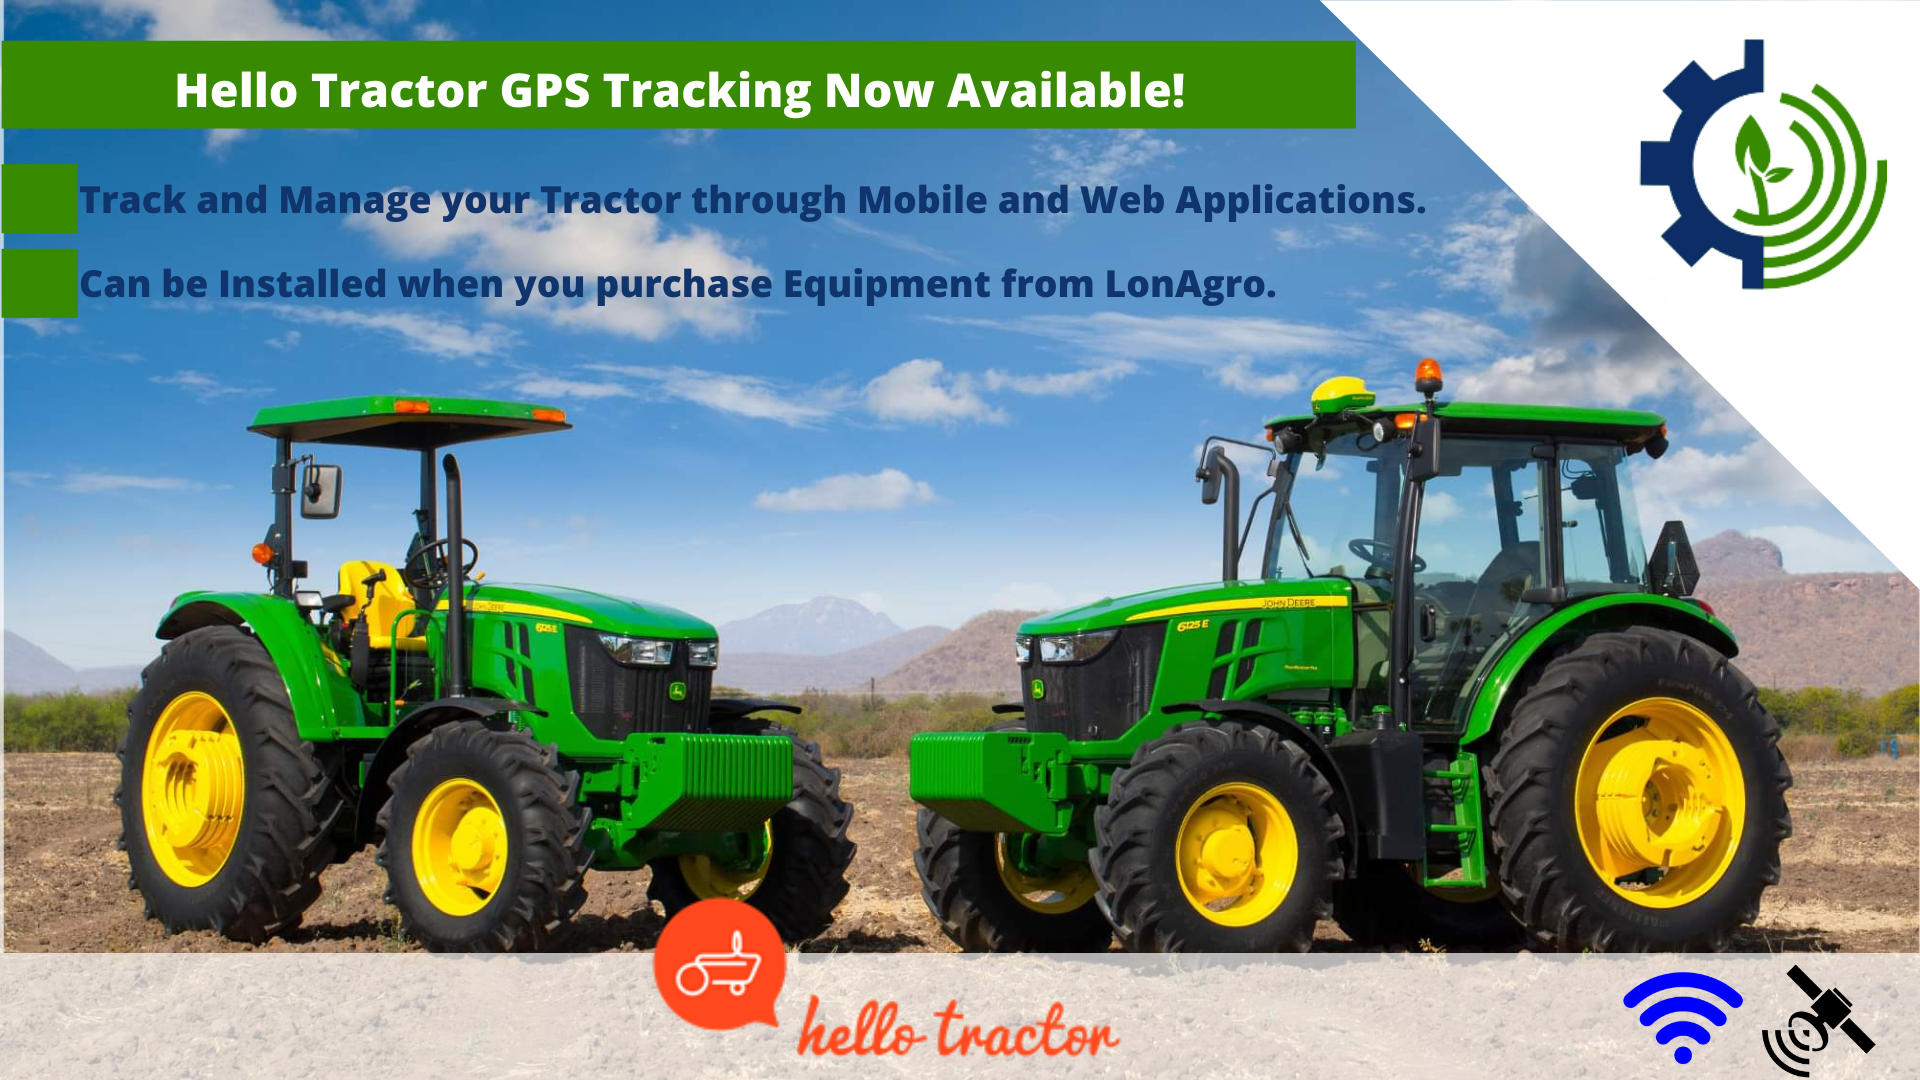 Hello Tractor_onAgro_GPS Tracking Now Available!